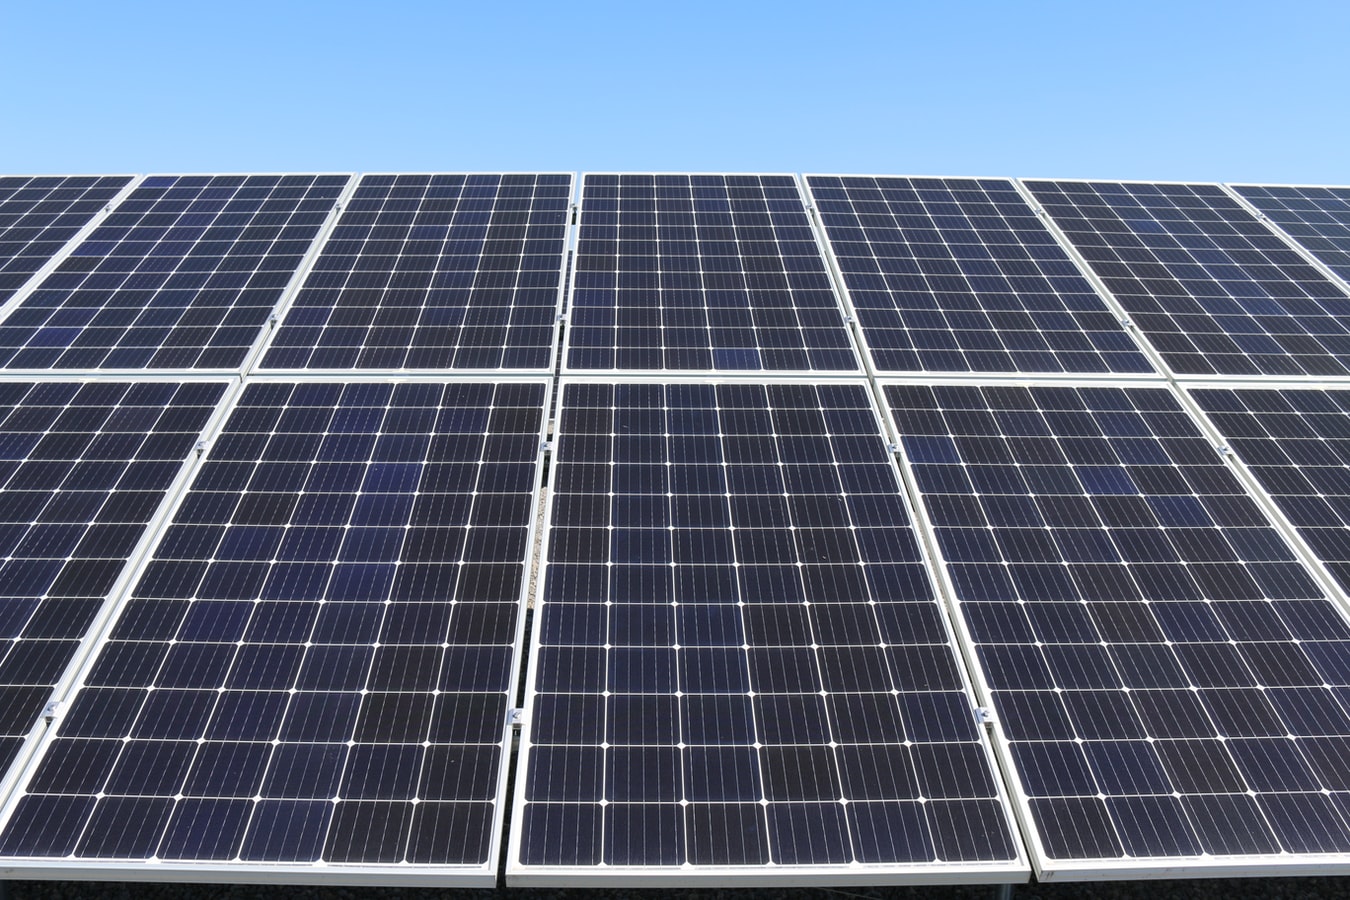 Multiple solar panels fastened together, underneath a clear blue sky.